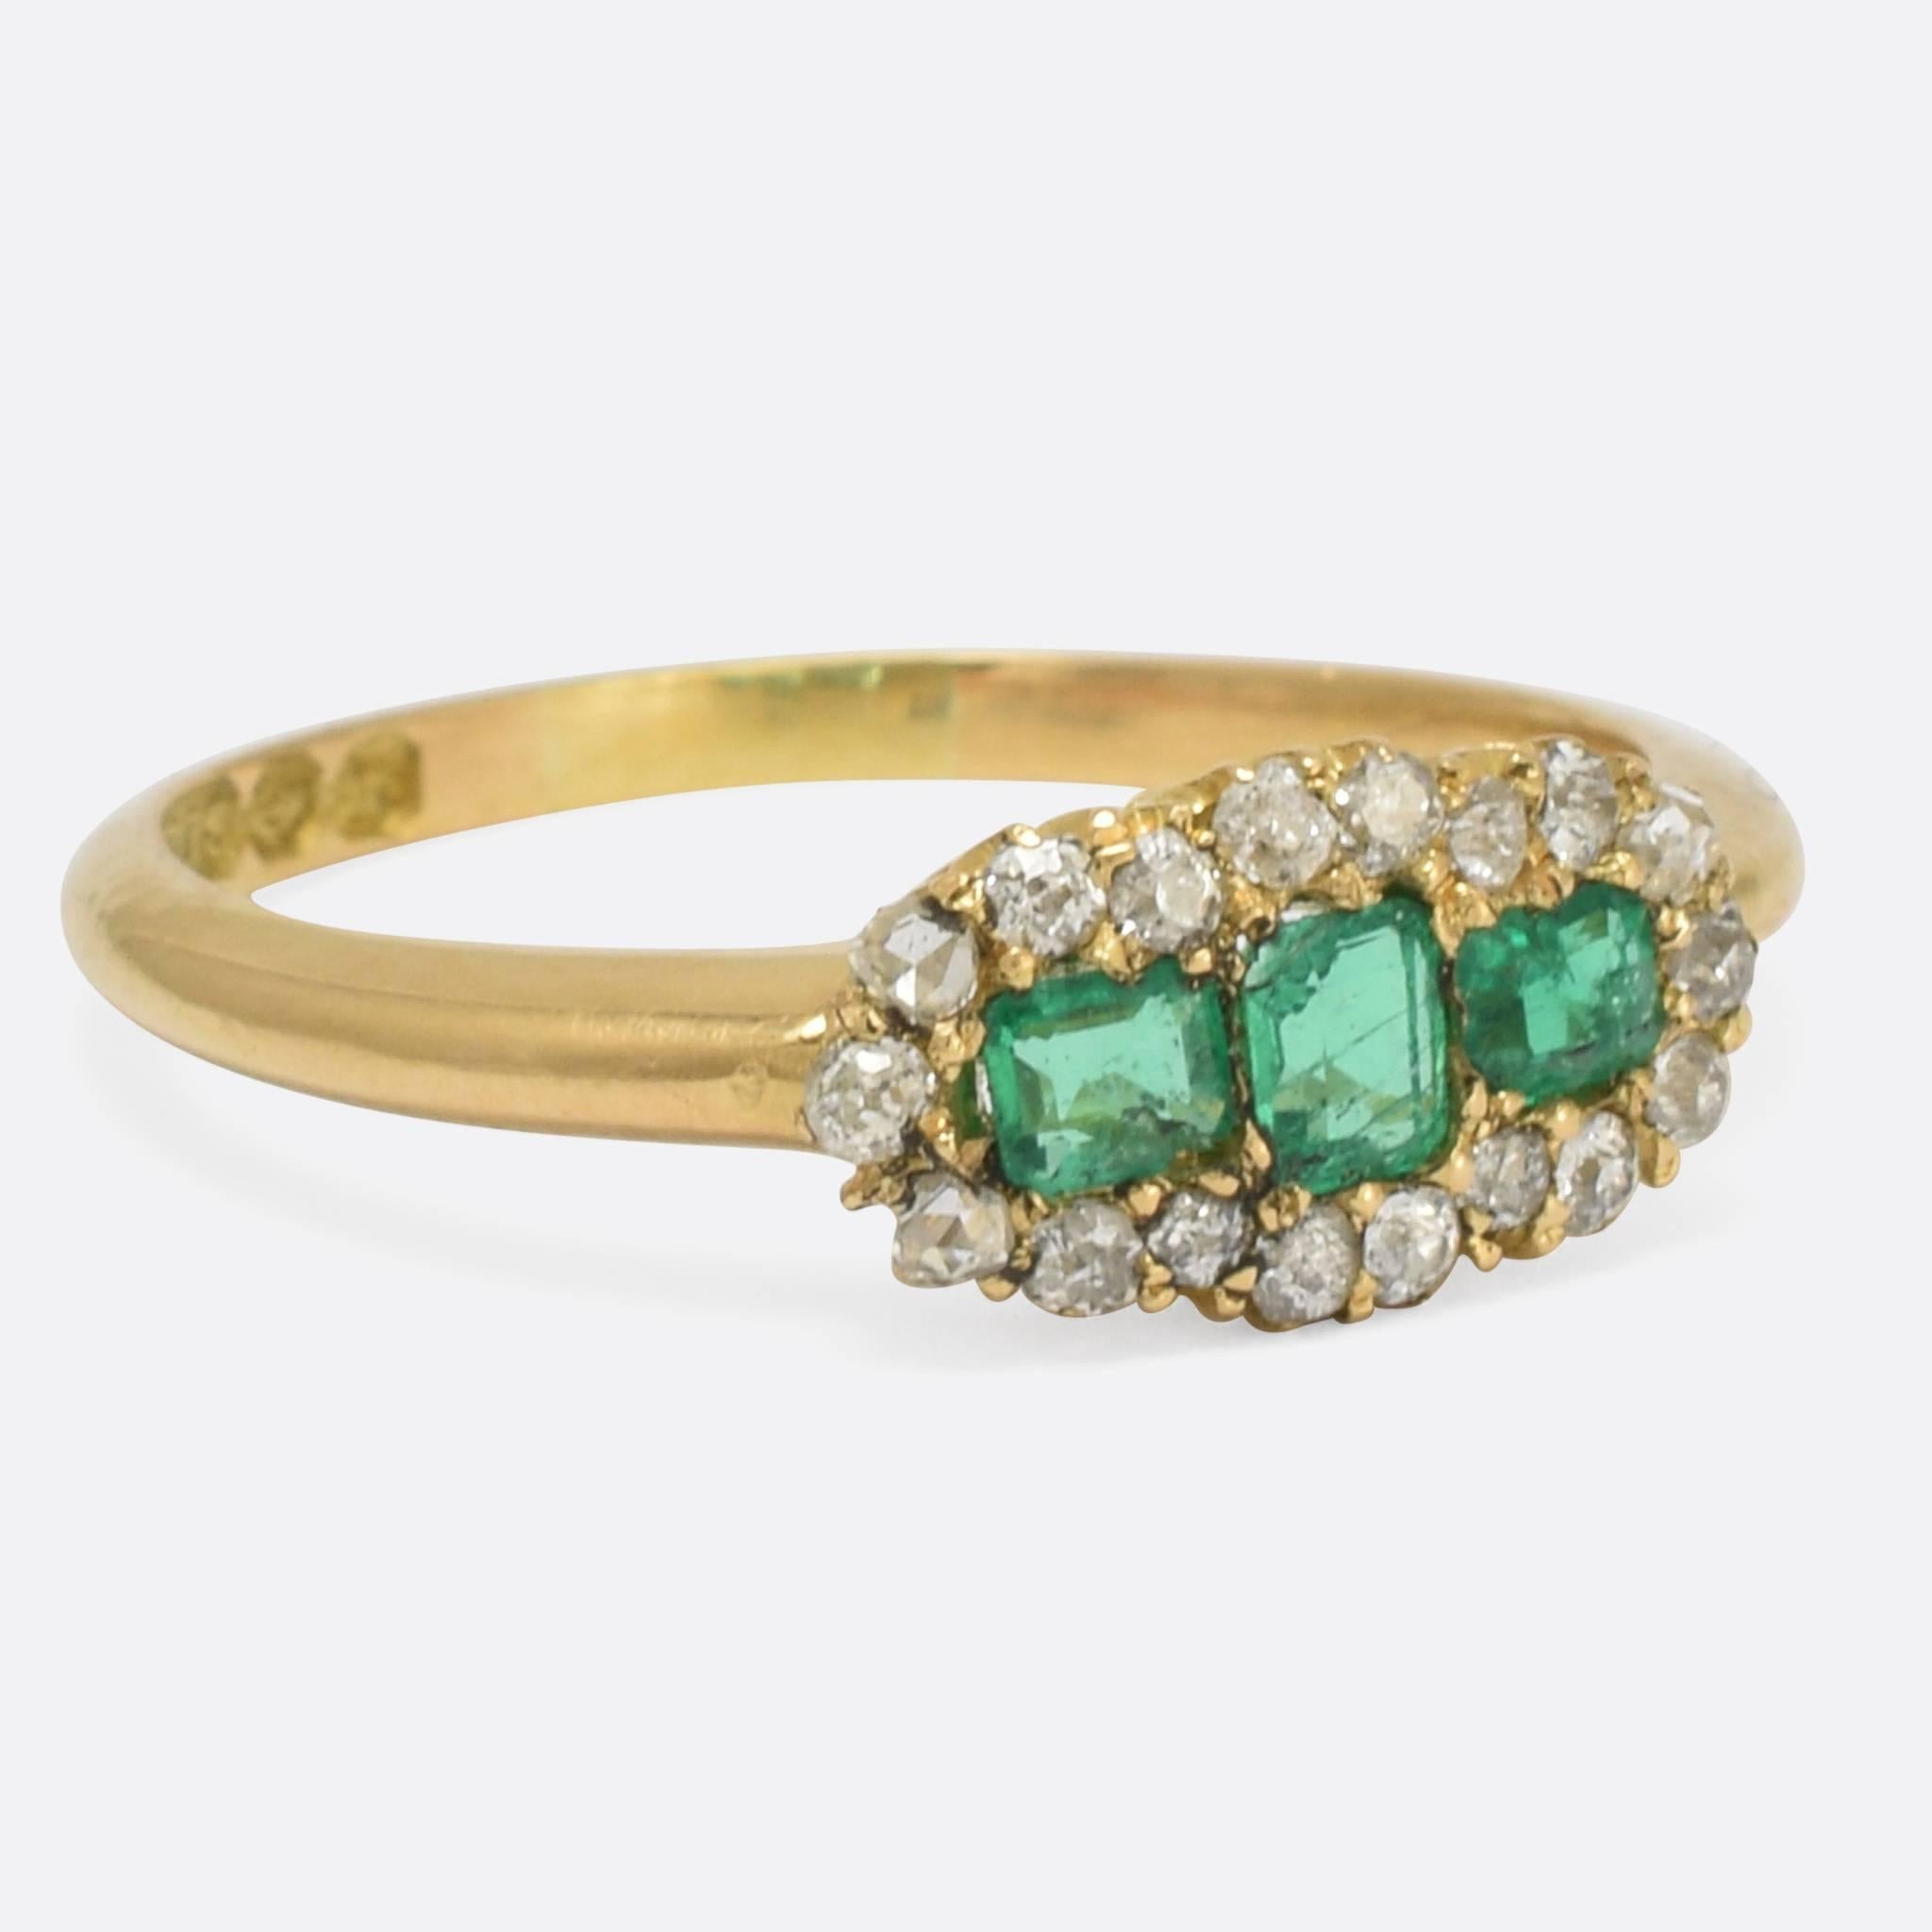 An adorable late Victorian emerald and diamond cluster ring. The three vibrant emeralds nestle between a cluster of old cut diamonds, all modelled in 18k gold. It dates to 1896, with clear Birmingham hallmarks to the inner band. Ring size: 7.75.